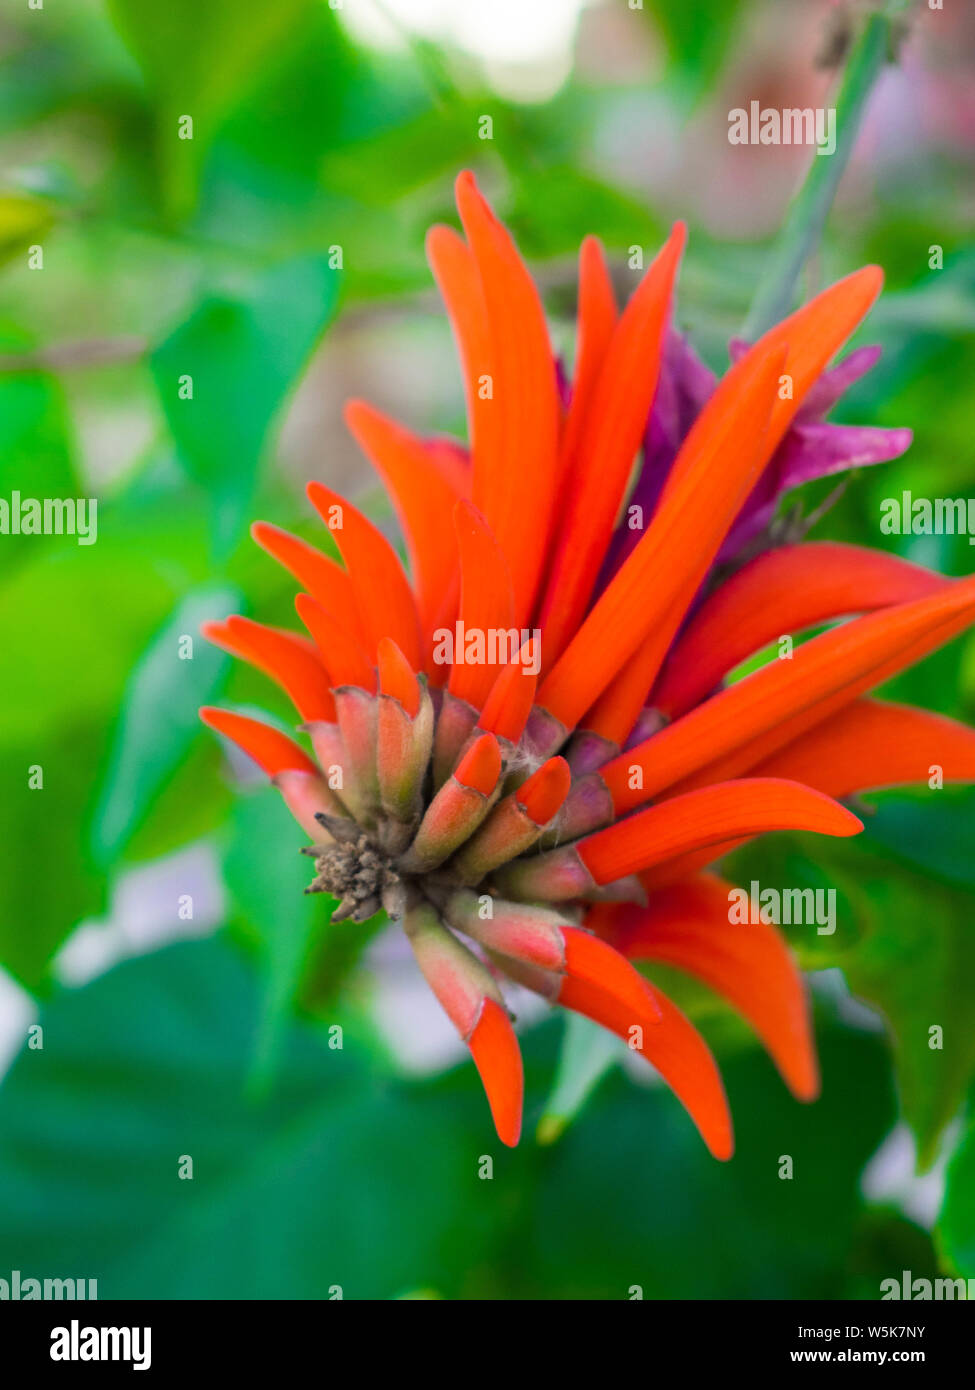 Flower of Erythrina spinosa (Erythrina corallodendrum) with green leaves Stock Photo